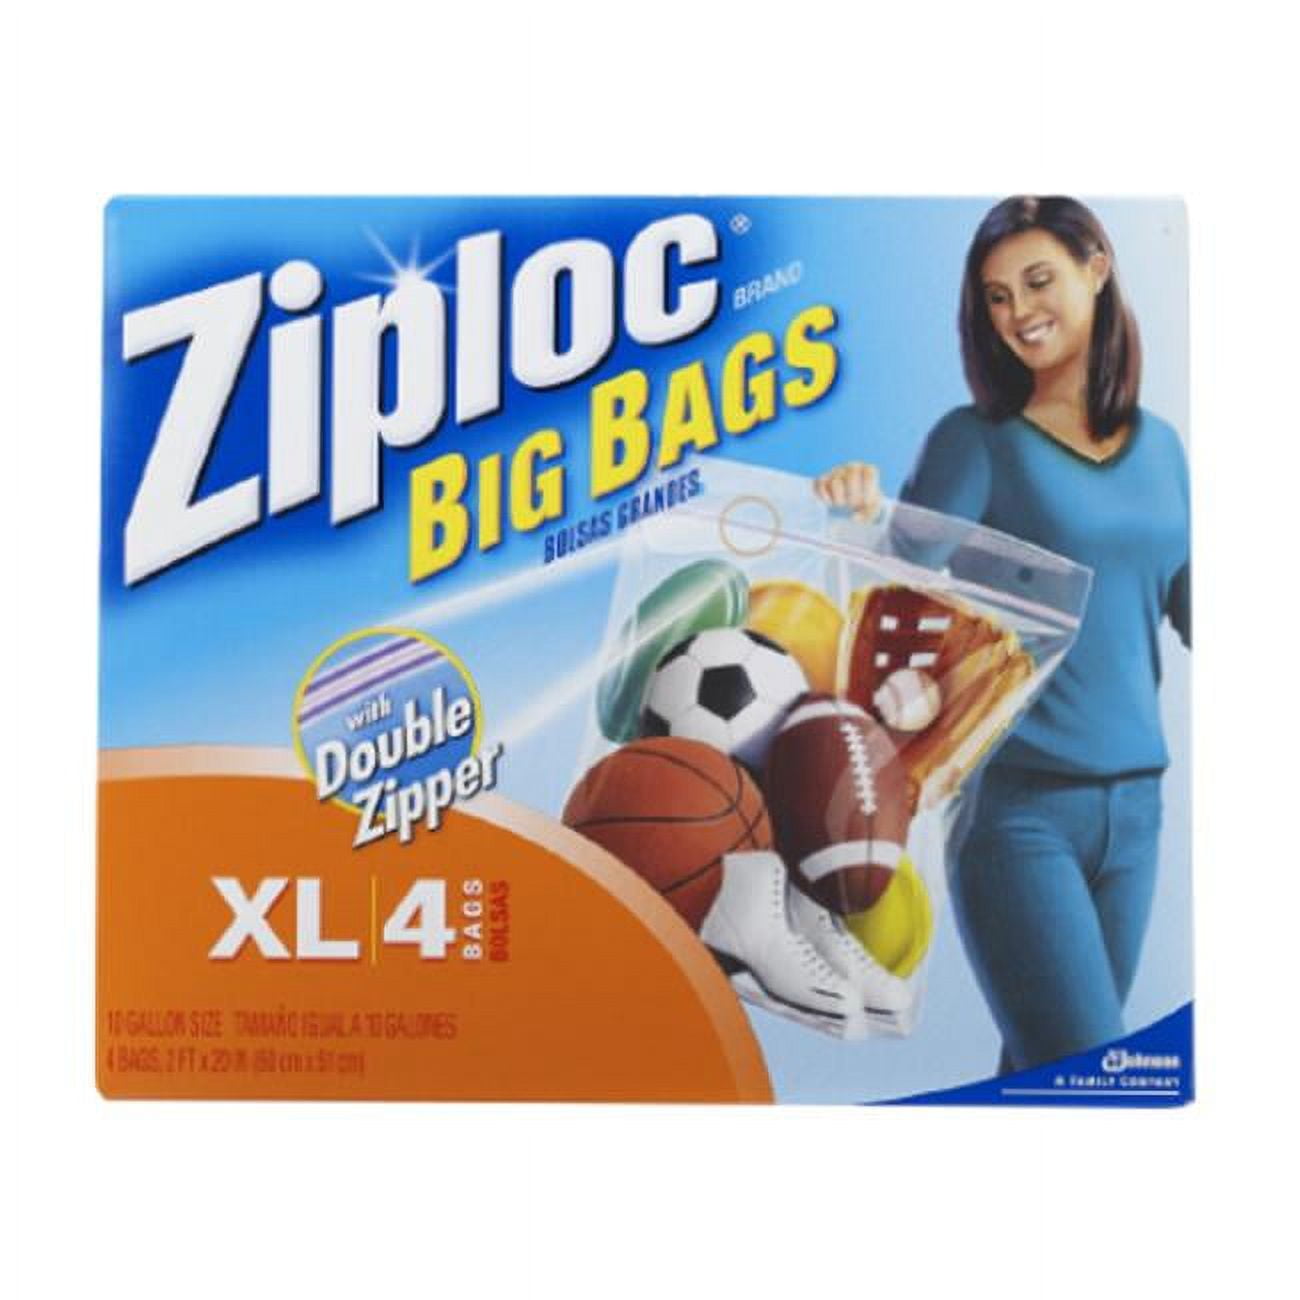  S C Johnson Wax 3 ct. Extra Large Big Bags (Pack of 4